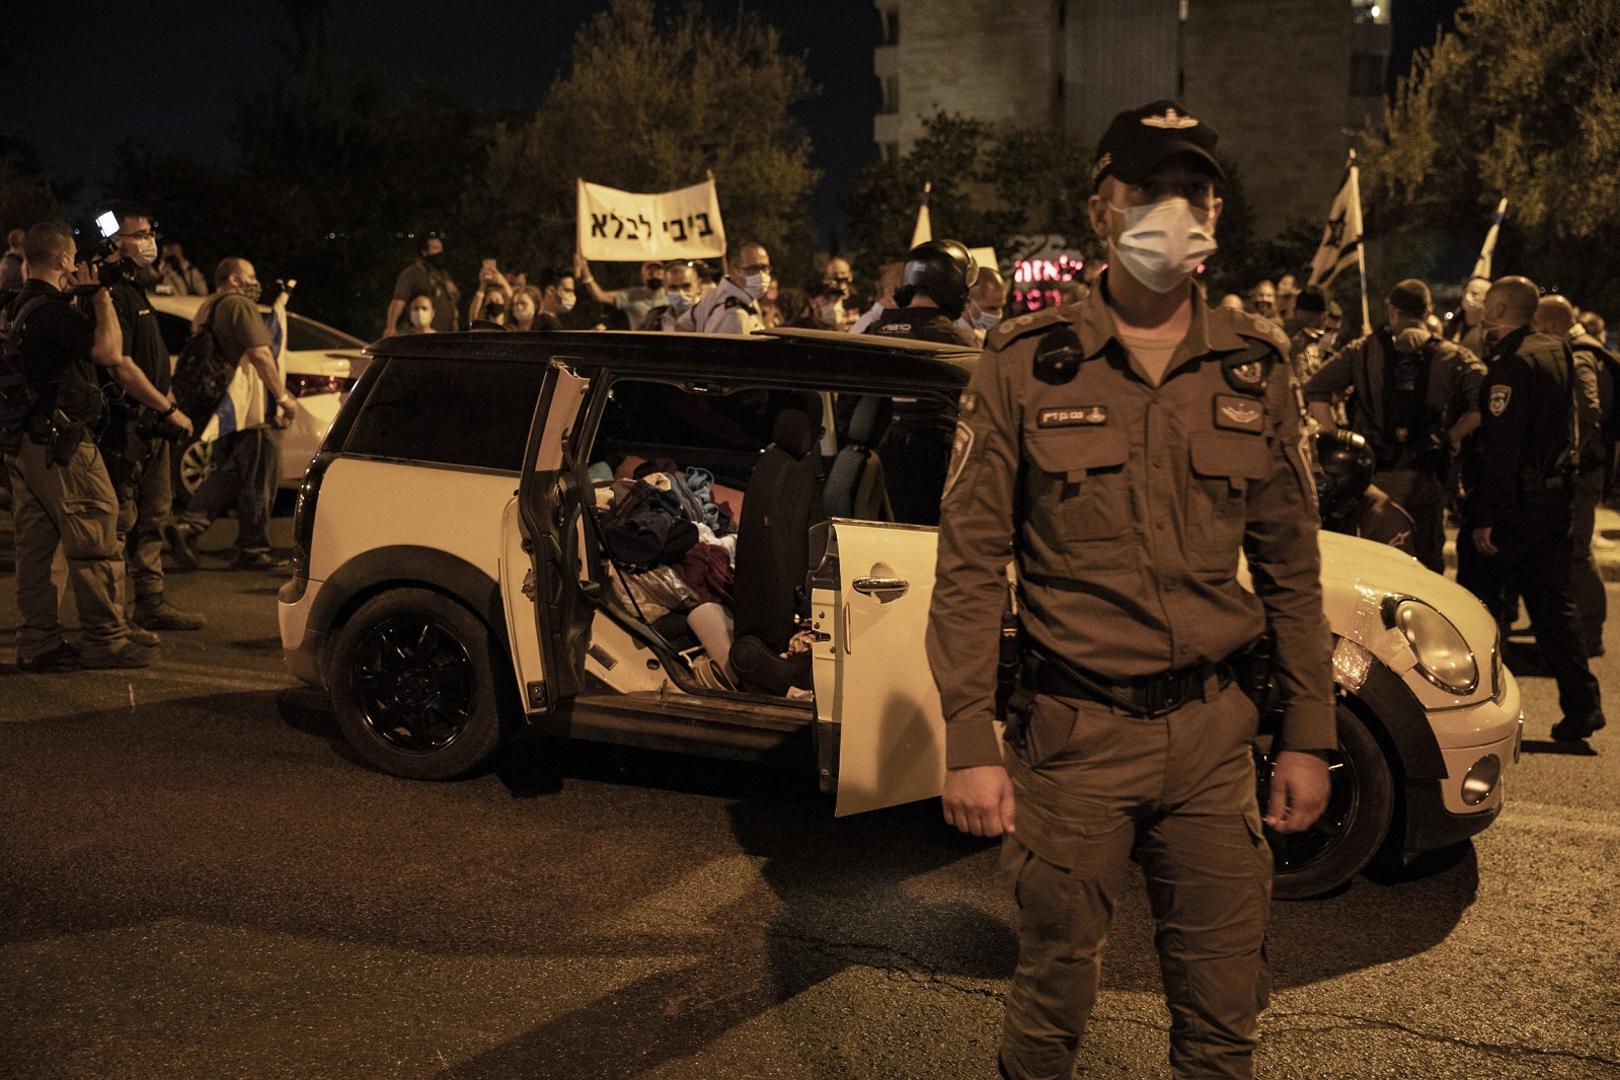 20 September 2020, Israel, Jerusalem: An Israeli policeman stands next to the car of a man who was arrested under suspicion of trying to run over anti-government protesters outside the residence of Israeli Prime Minister Benjamin Netanyahu. Photo: Ilia Yefimovich/dpa /DPA/PIXSELL